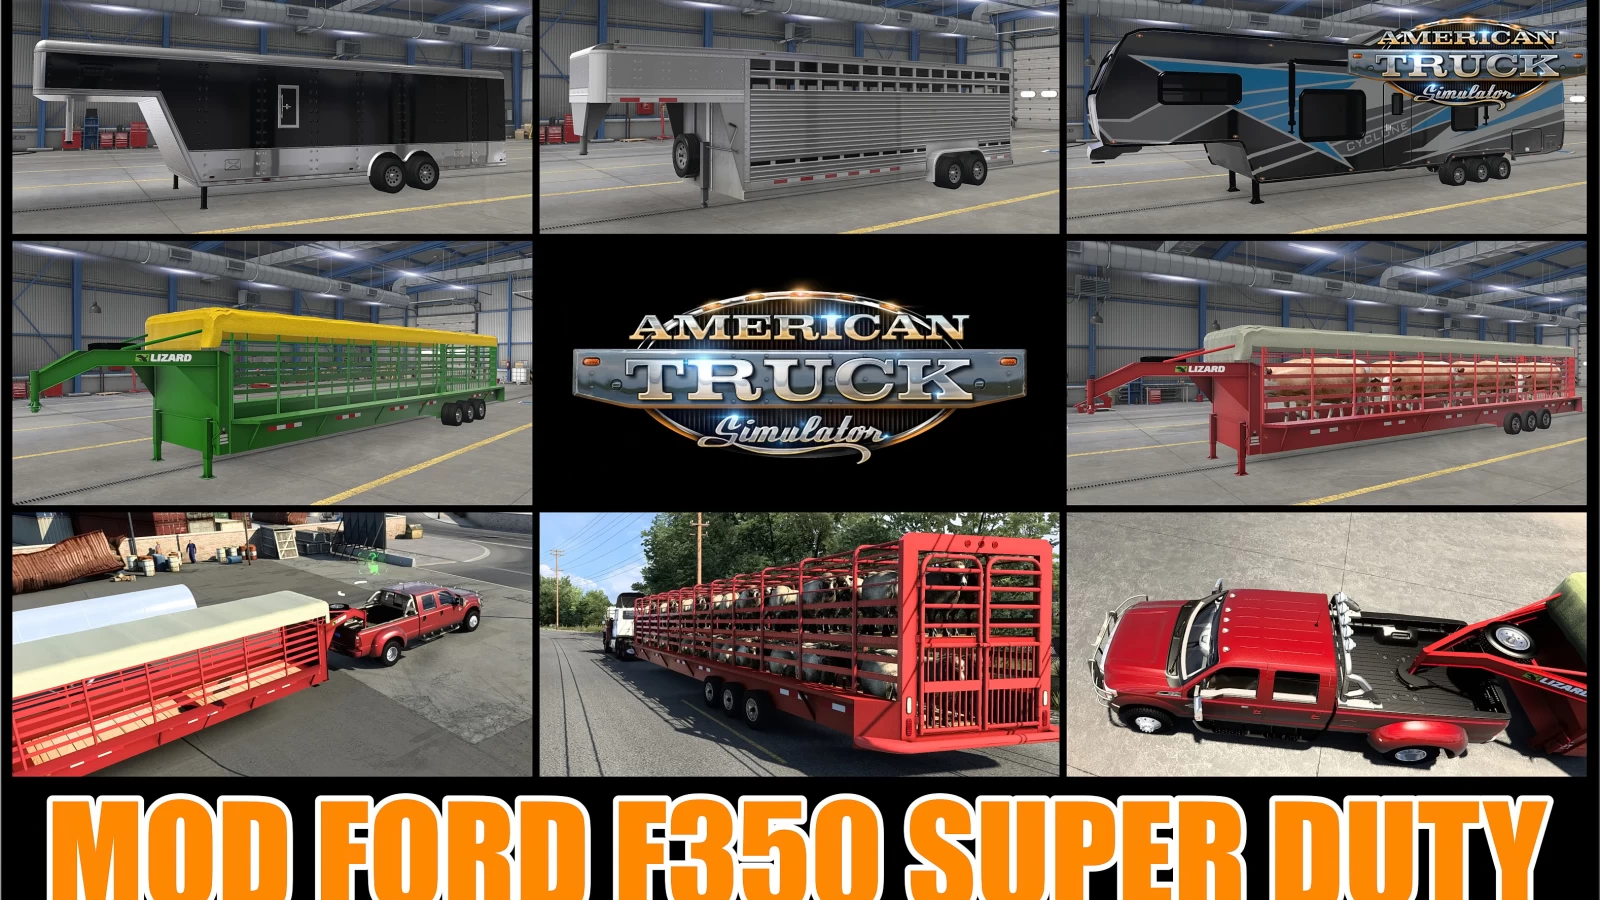 Ford F350 Super Duty + Trailers v1.0 (1.46.x) for ATS